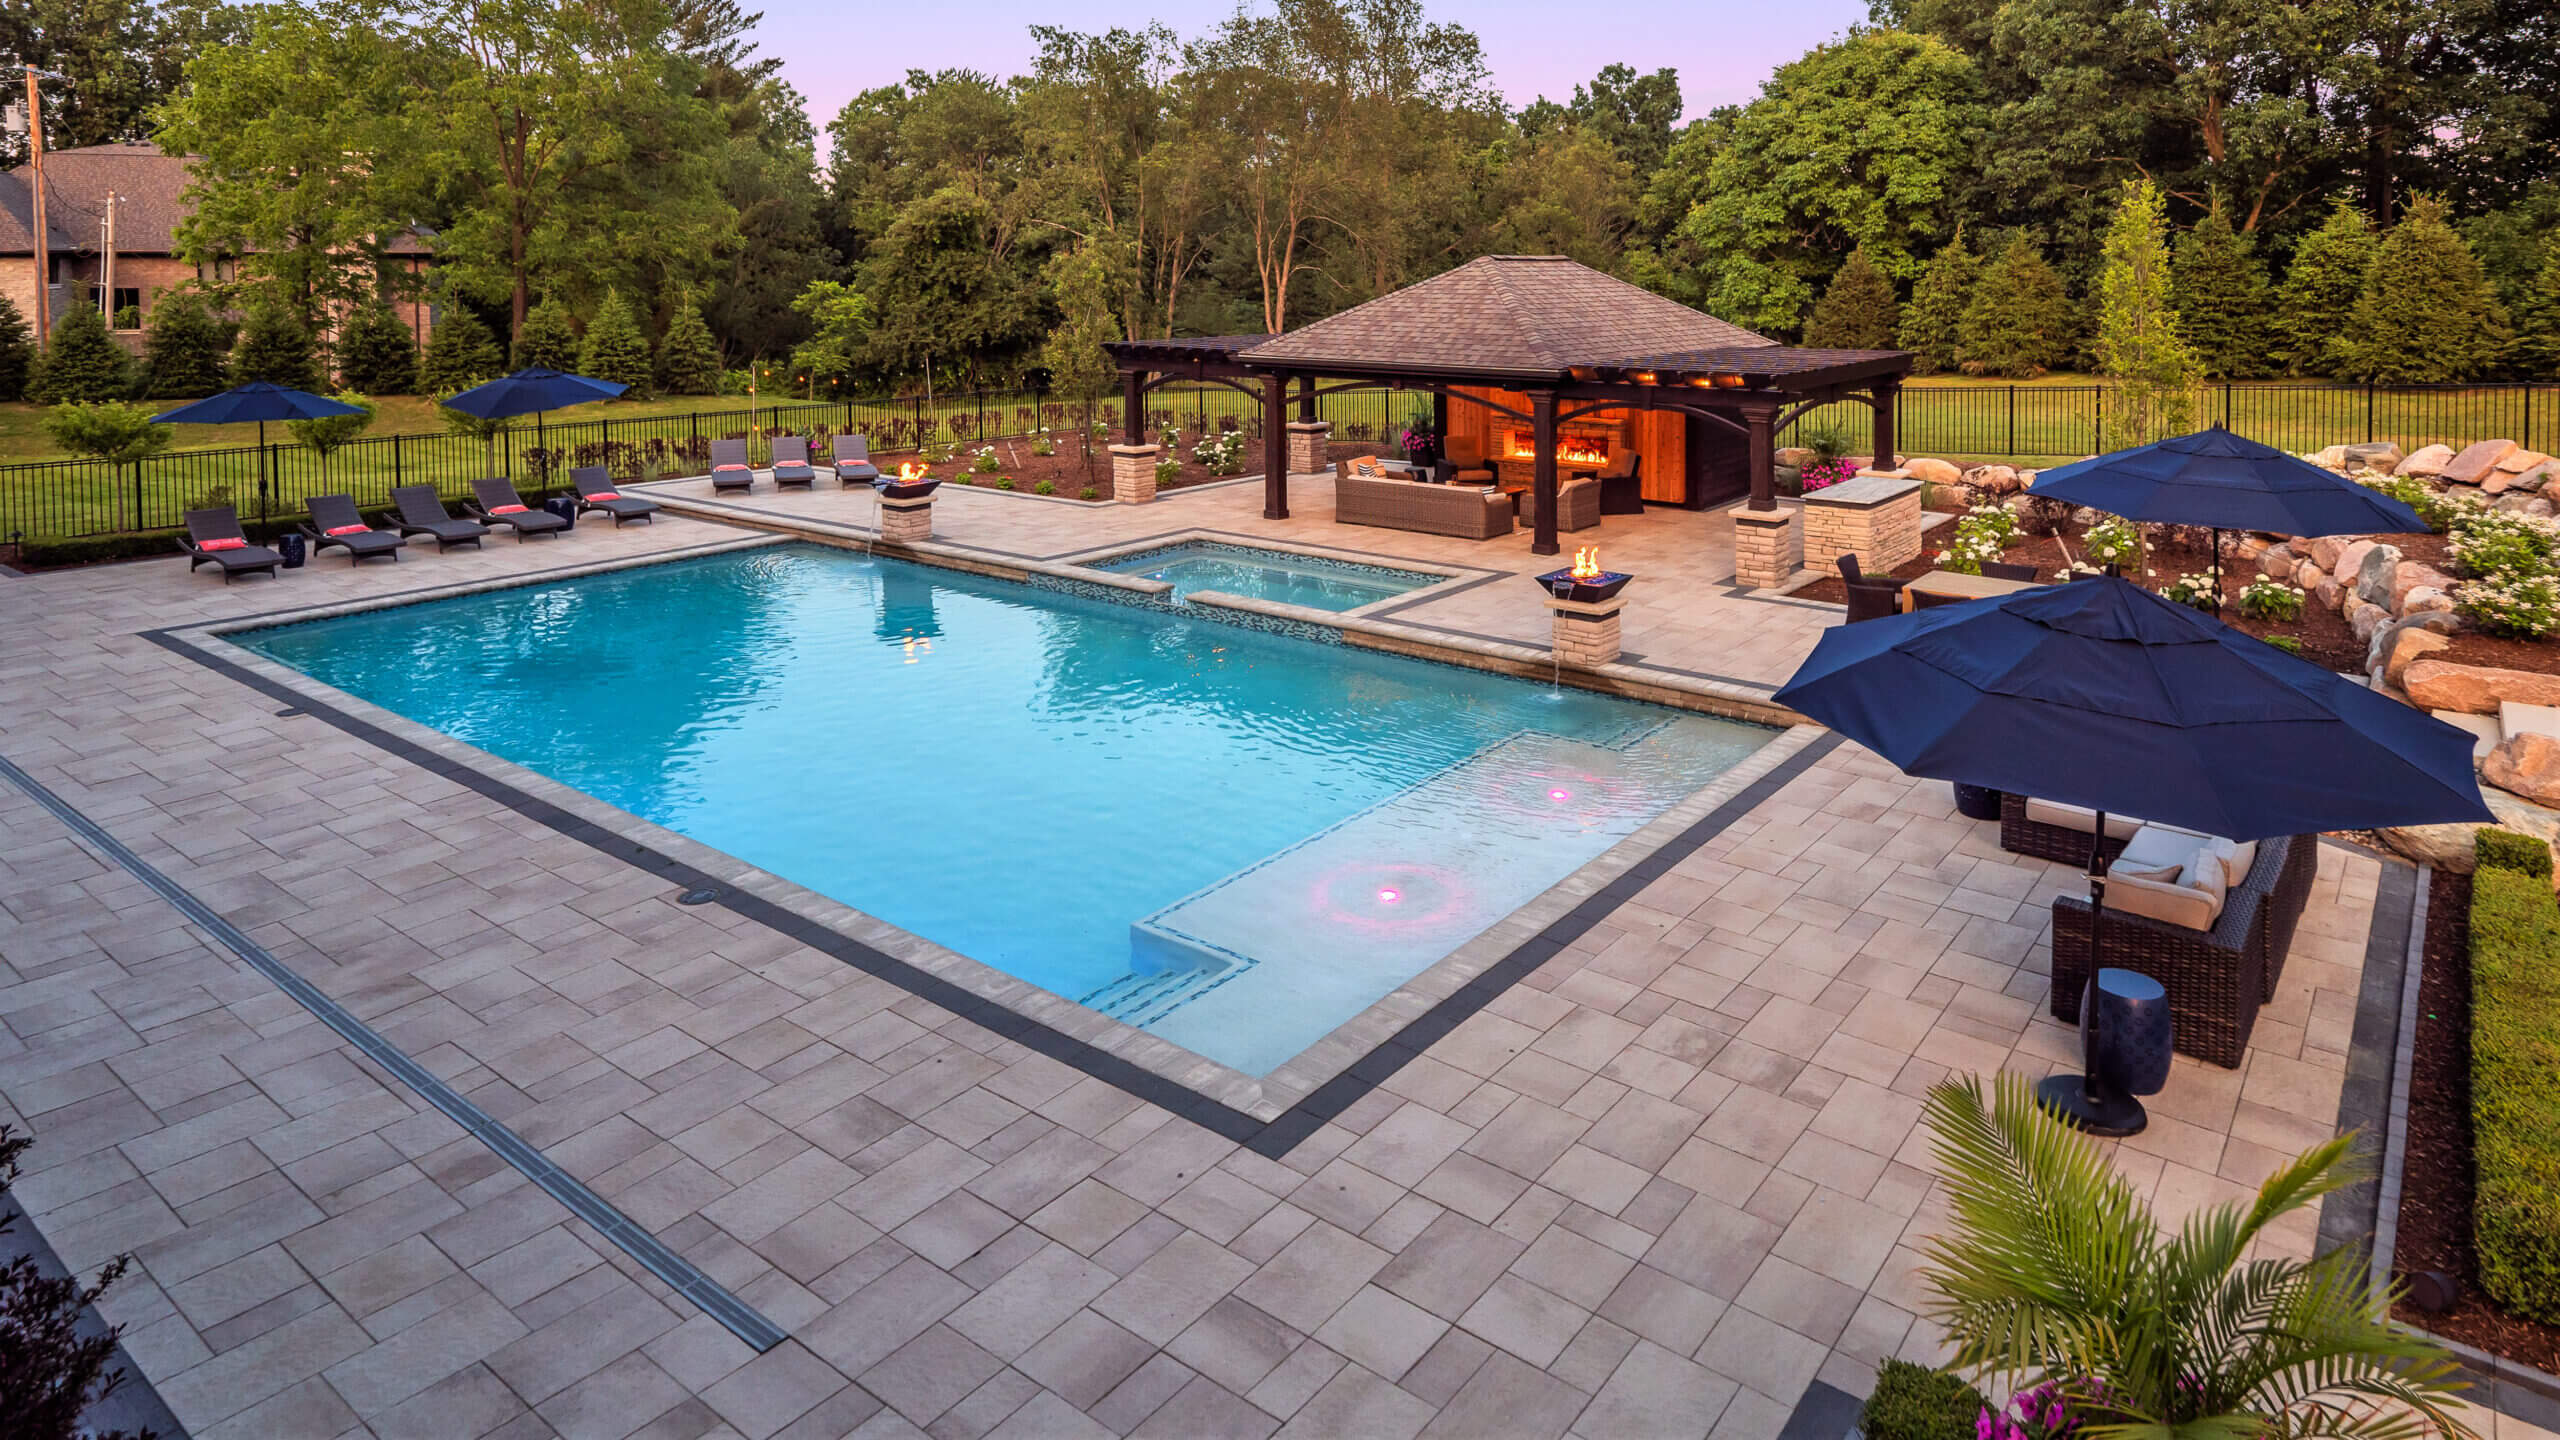 gunite pools, patio pavers, concrete paving, inground pools, pool and spa, fire bowls, patio covers in michigan, patio ideas, pool inspo